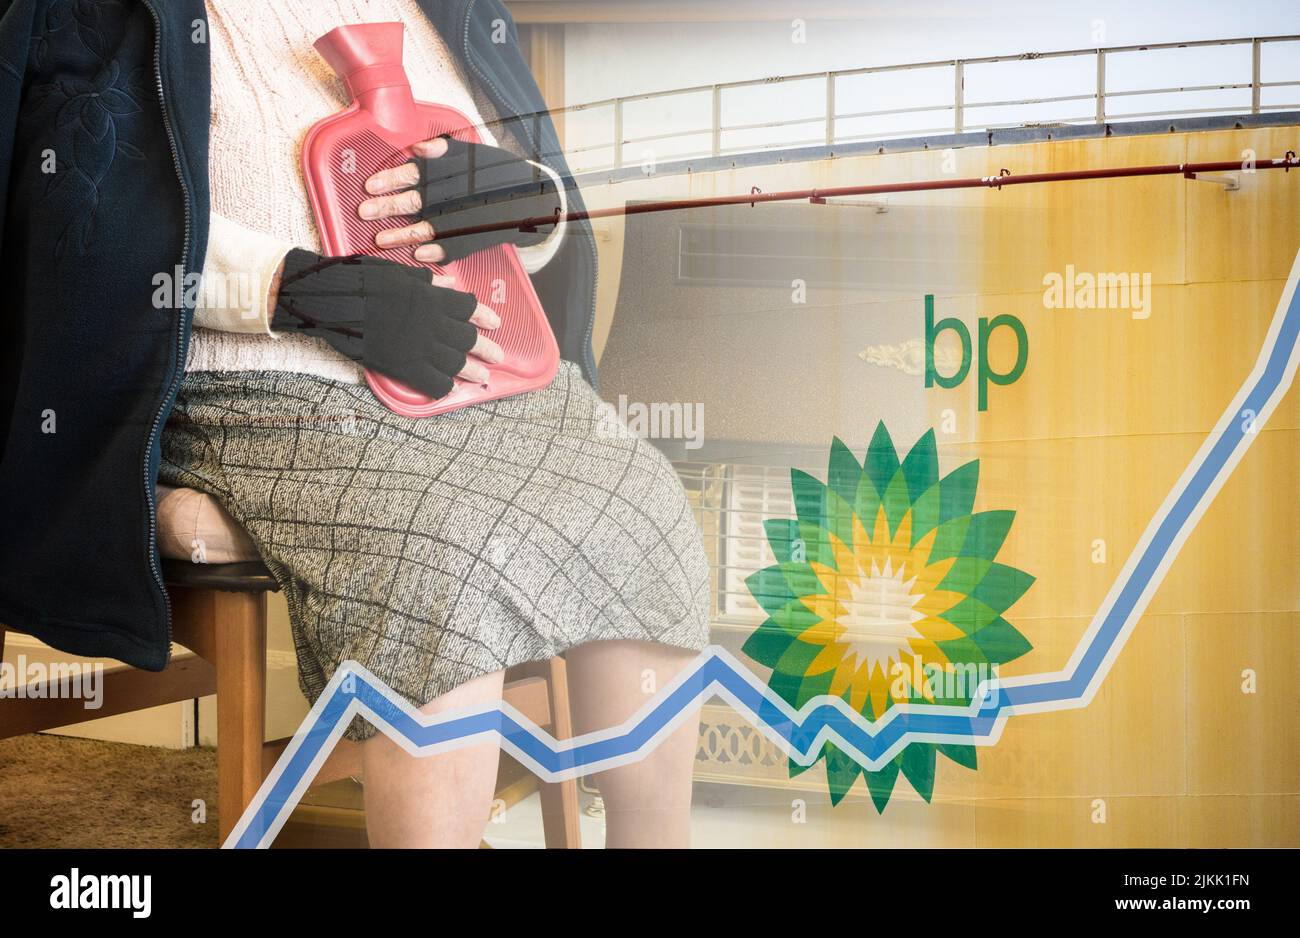 Elderly lady holding hot water bottle, sitting near gas fire that's turned off. BP fuel storage tank and profit graph line composite. BP profits... Stock Photo